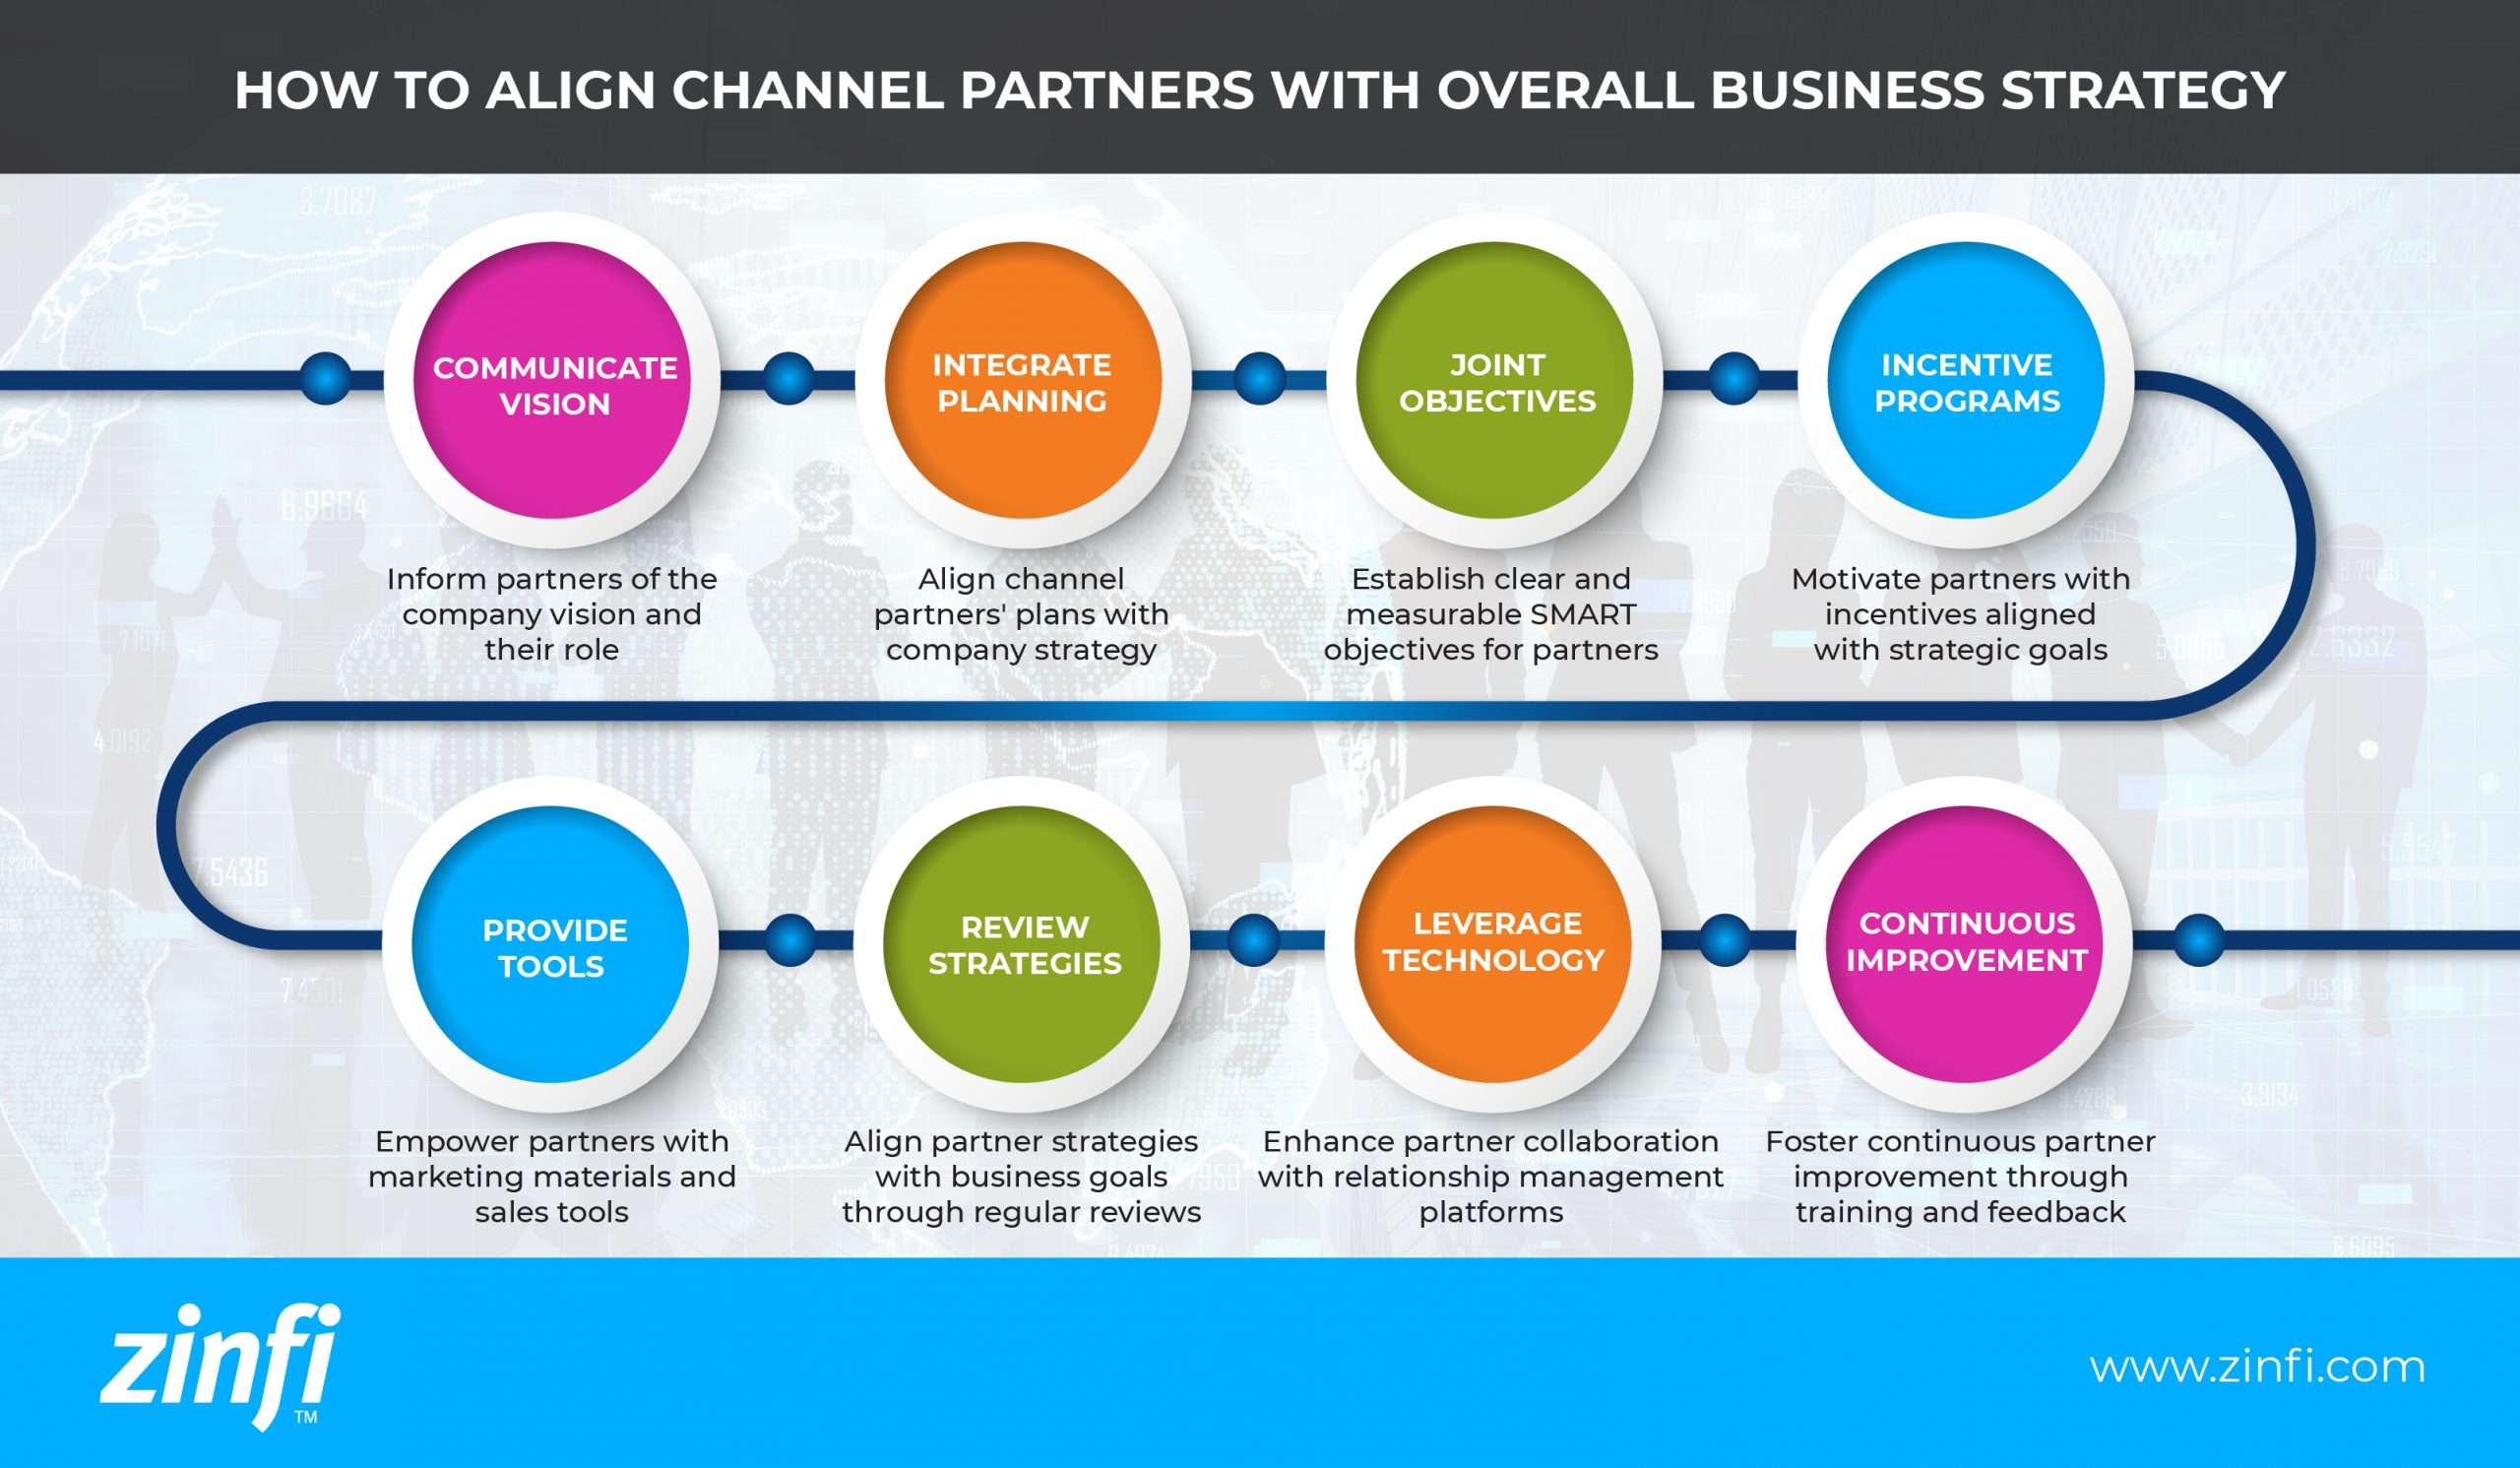 How to Align Channel Partners with Overall Business Strategy